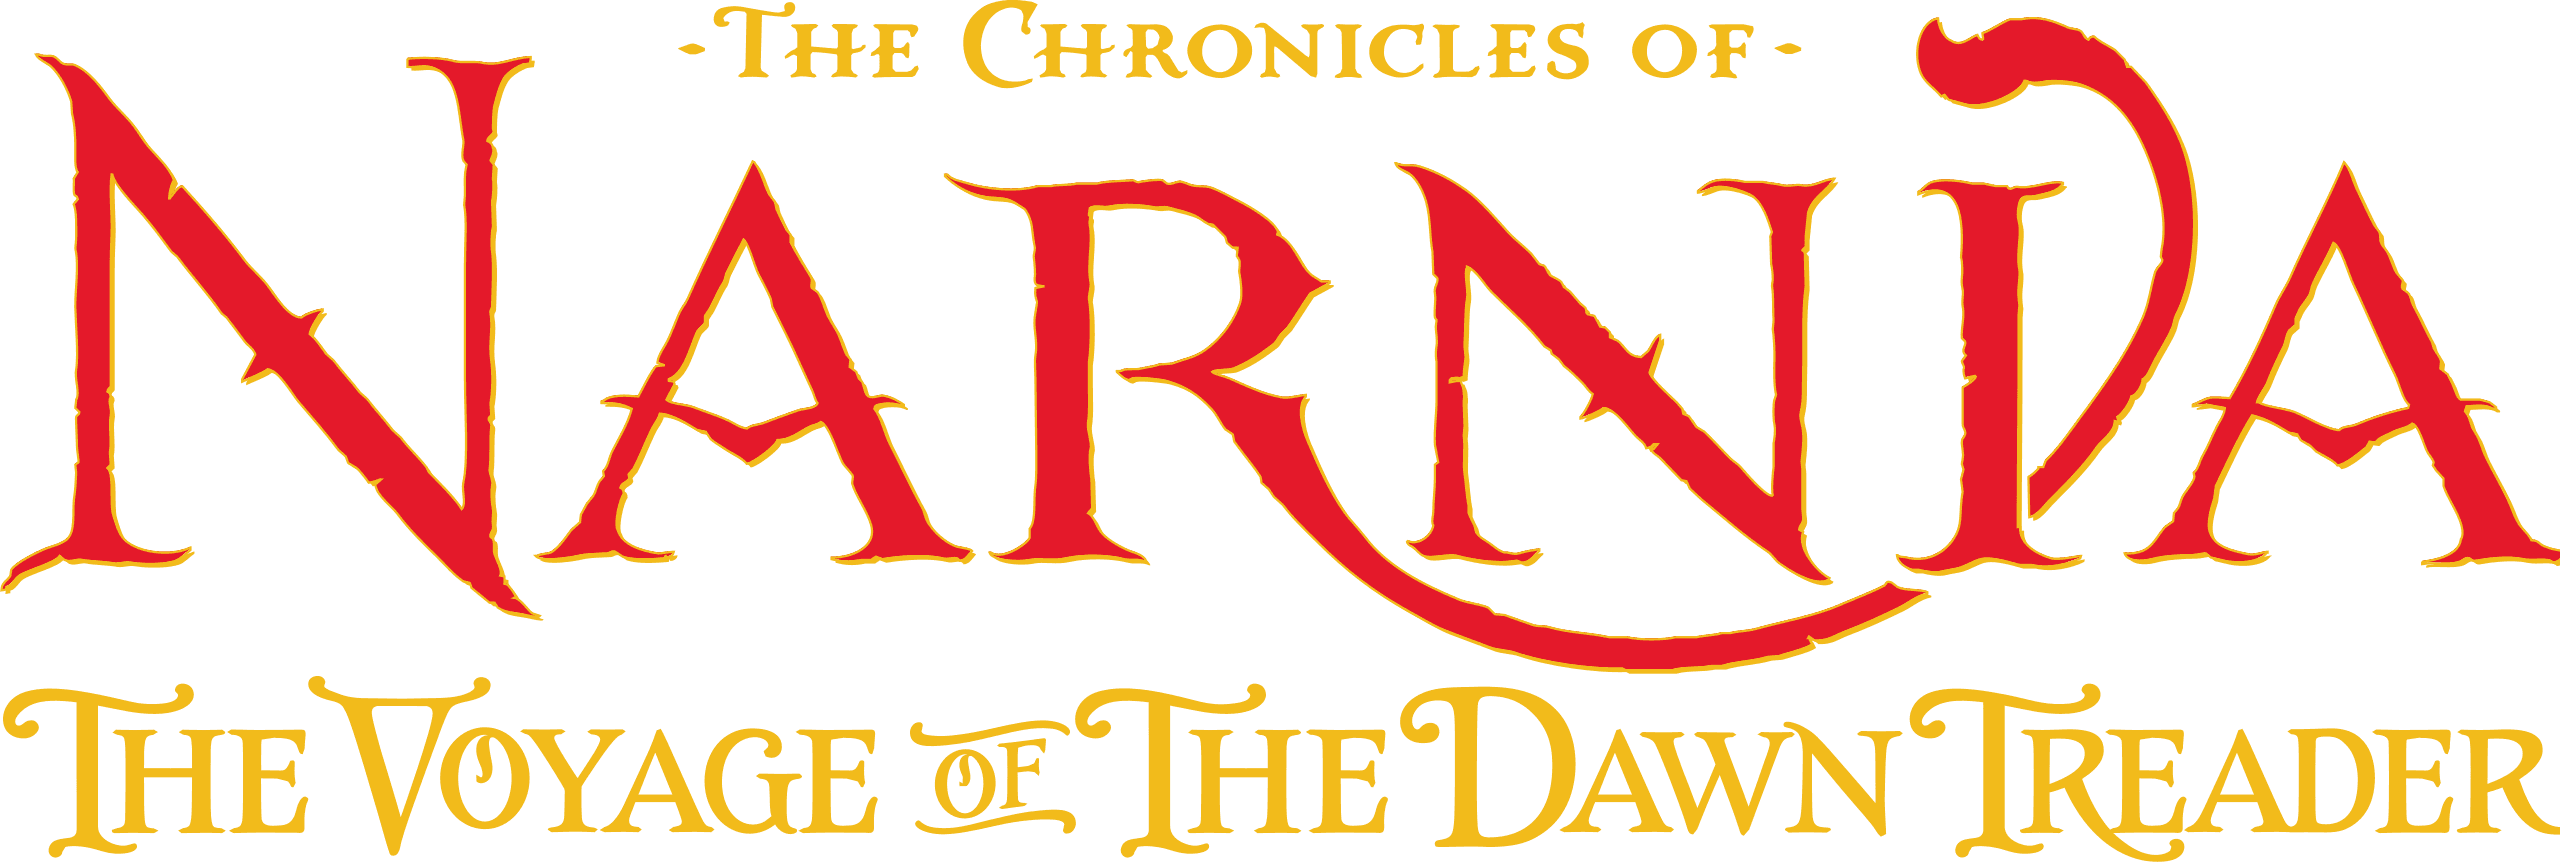 The Chronicles of Narnia: The Voyage of the Dawn Treader logo